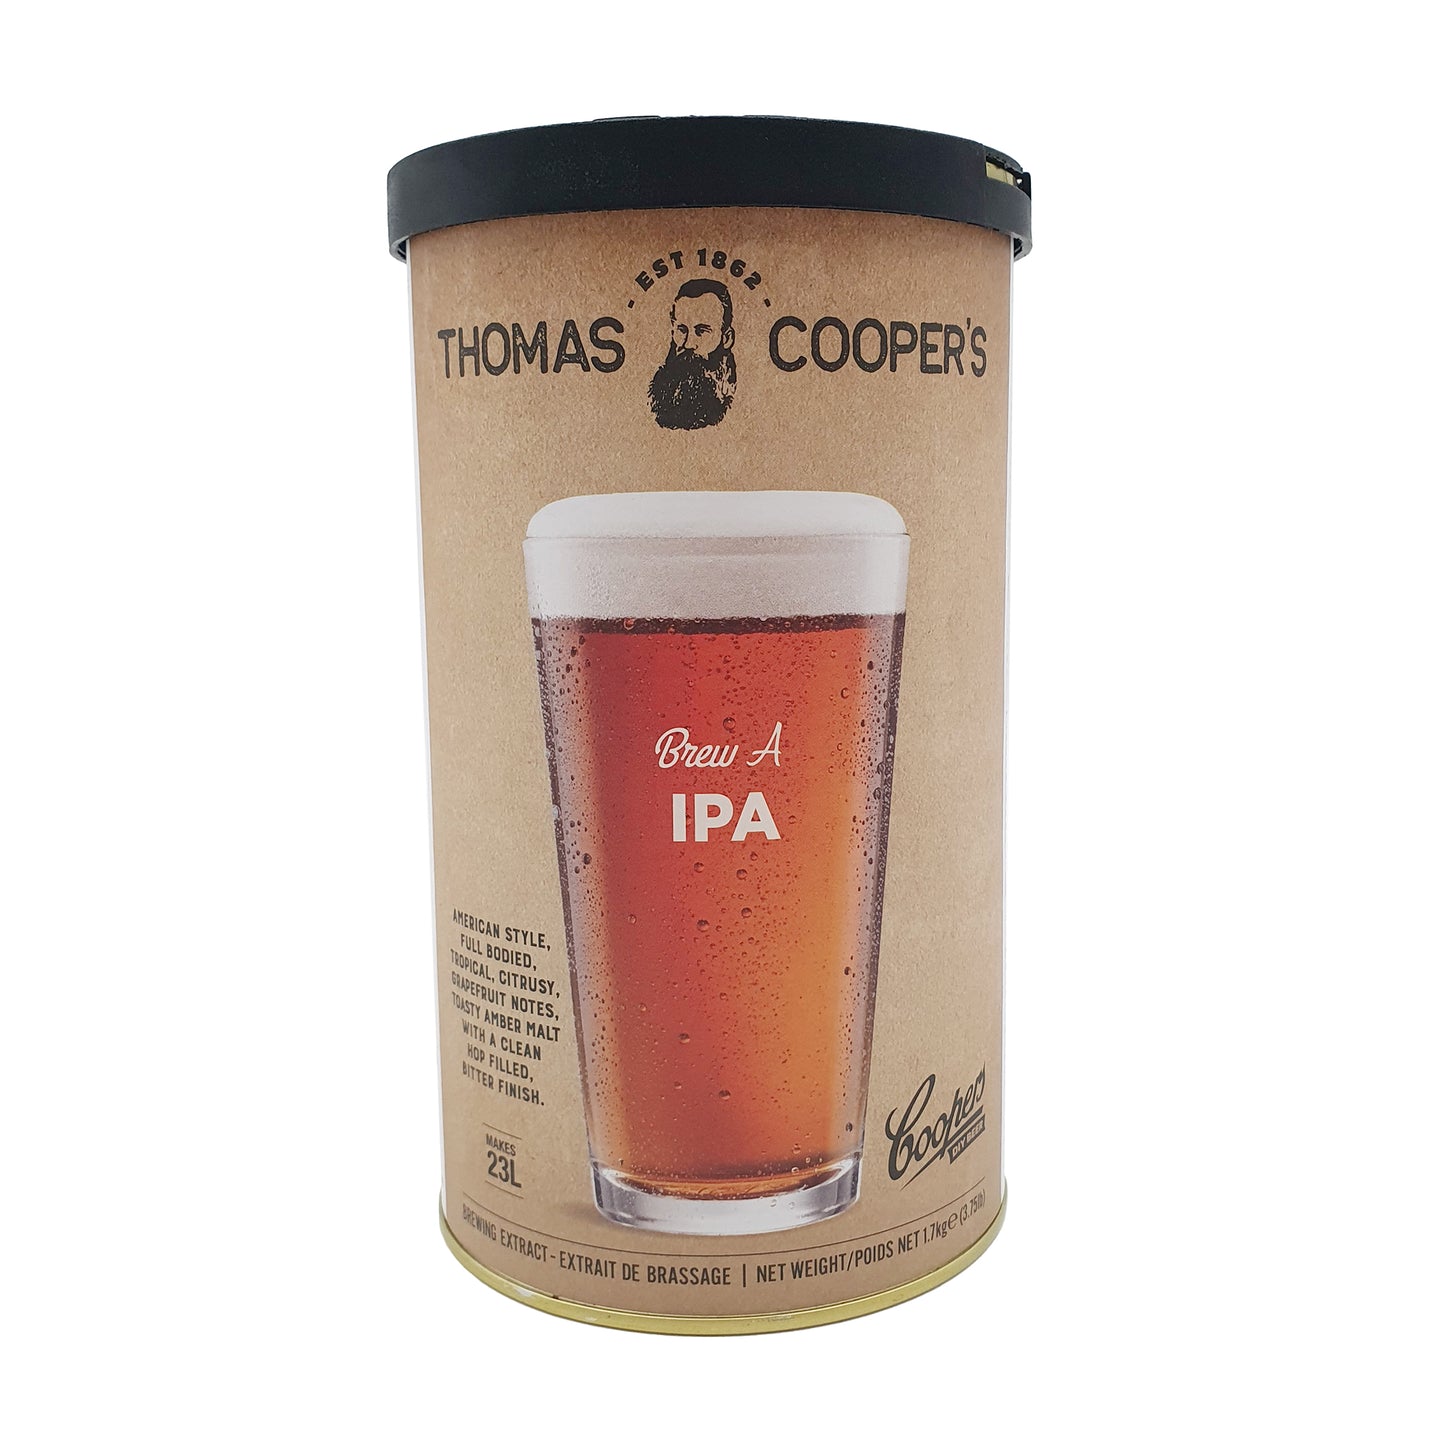 Coopers Brew A IPA beer tin